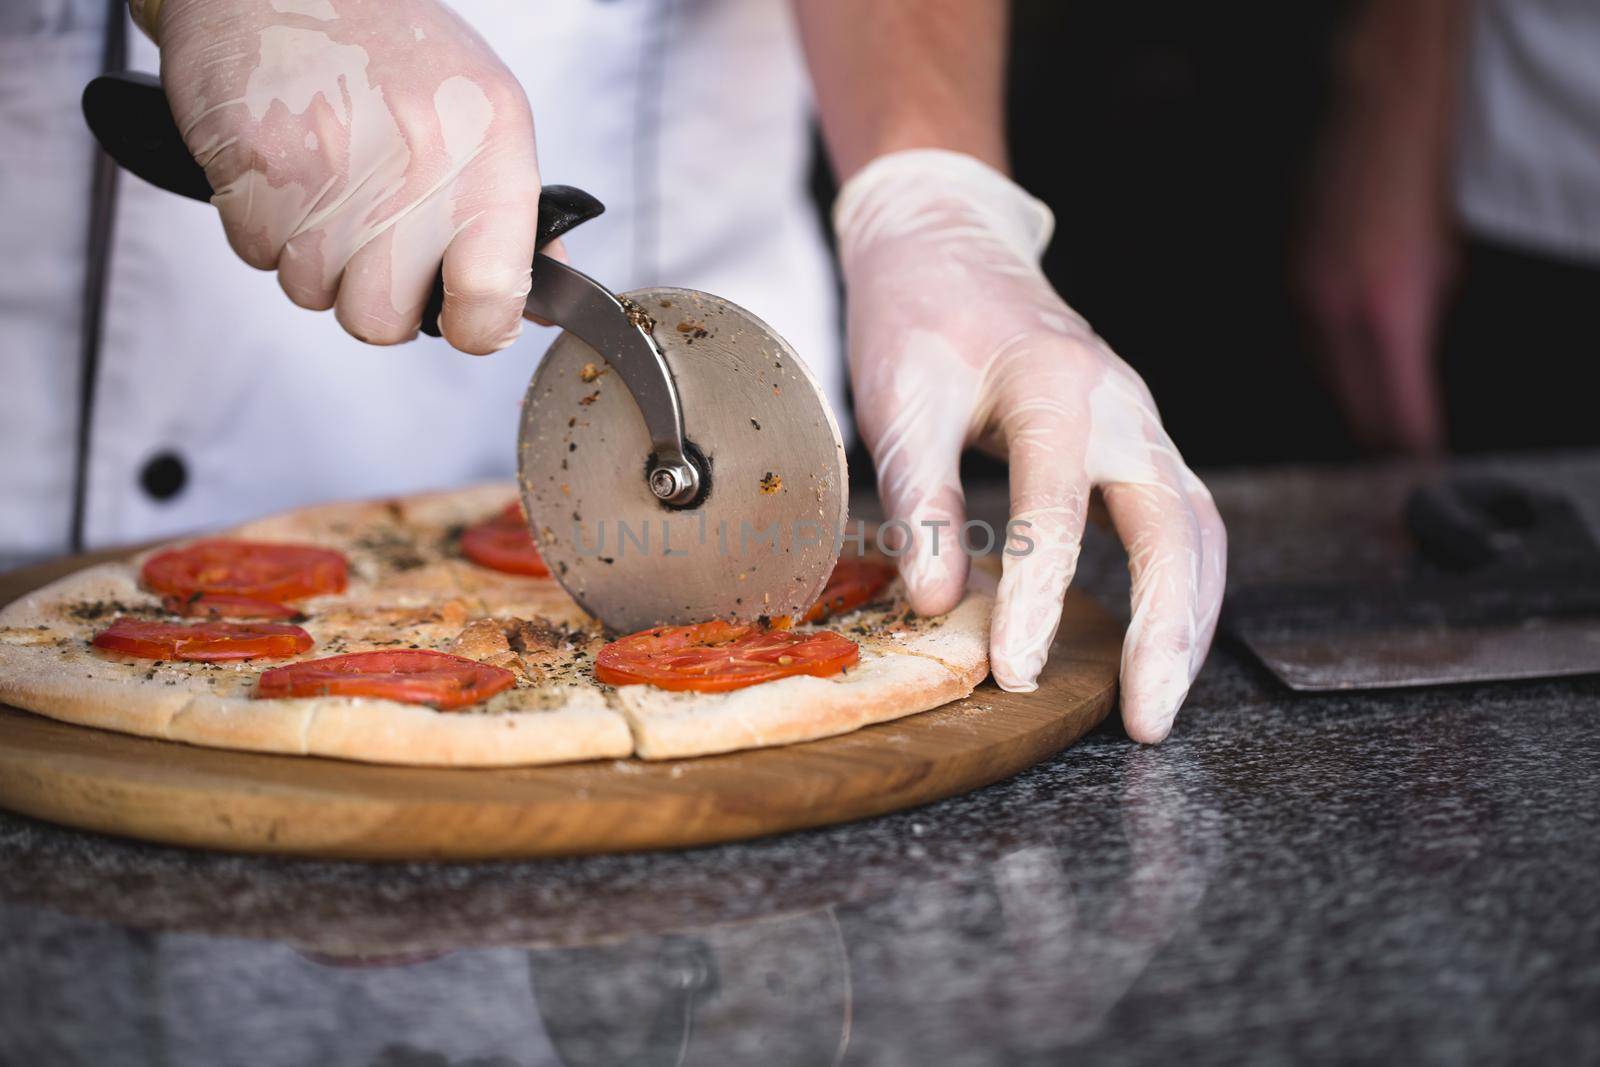 The cook cuts pizza with a round knife.